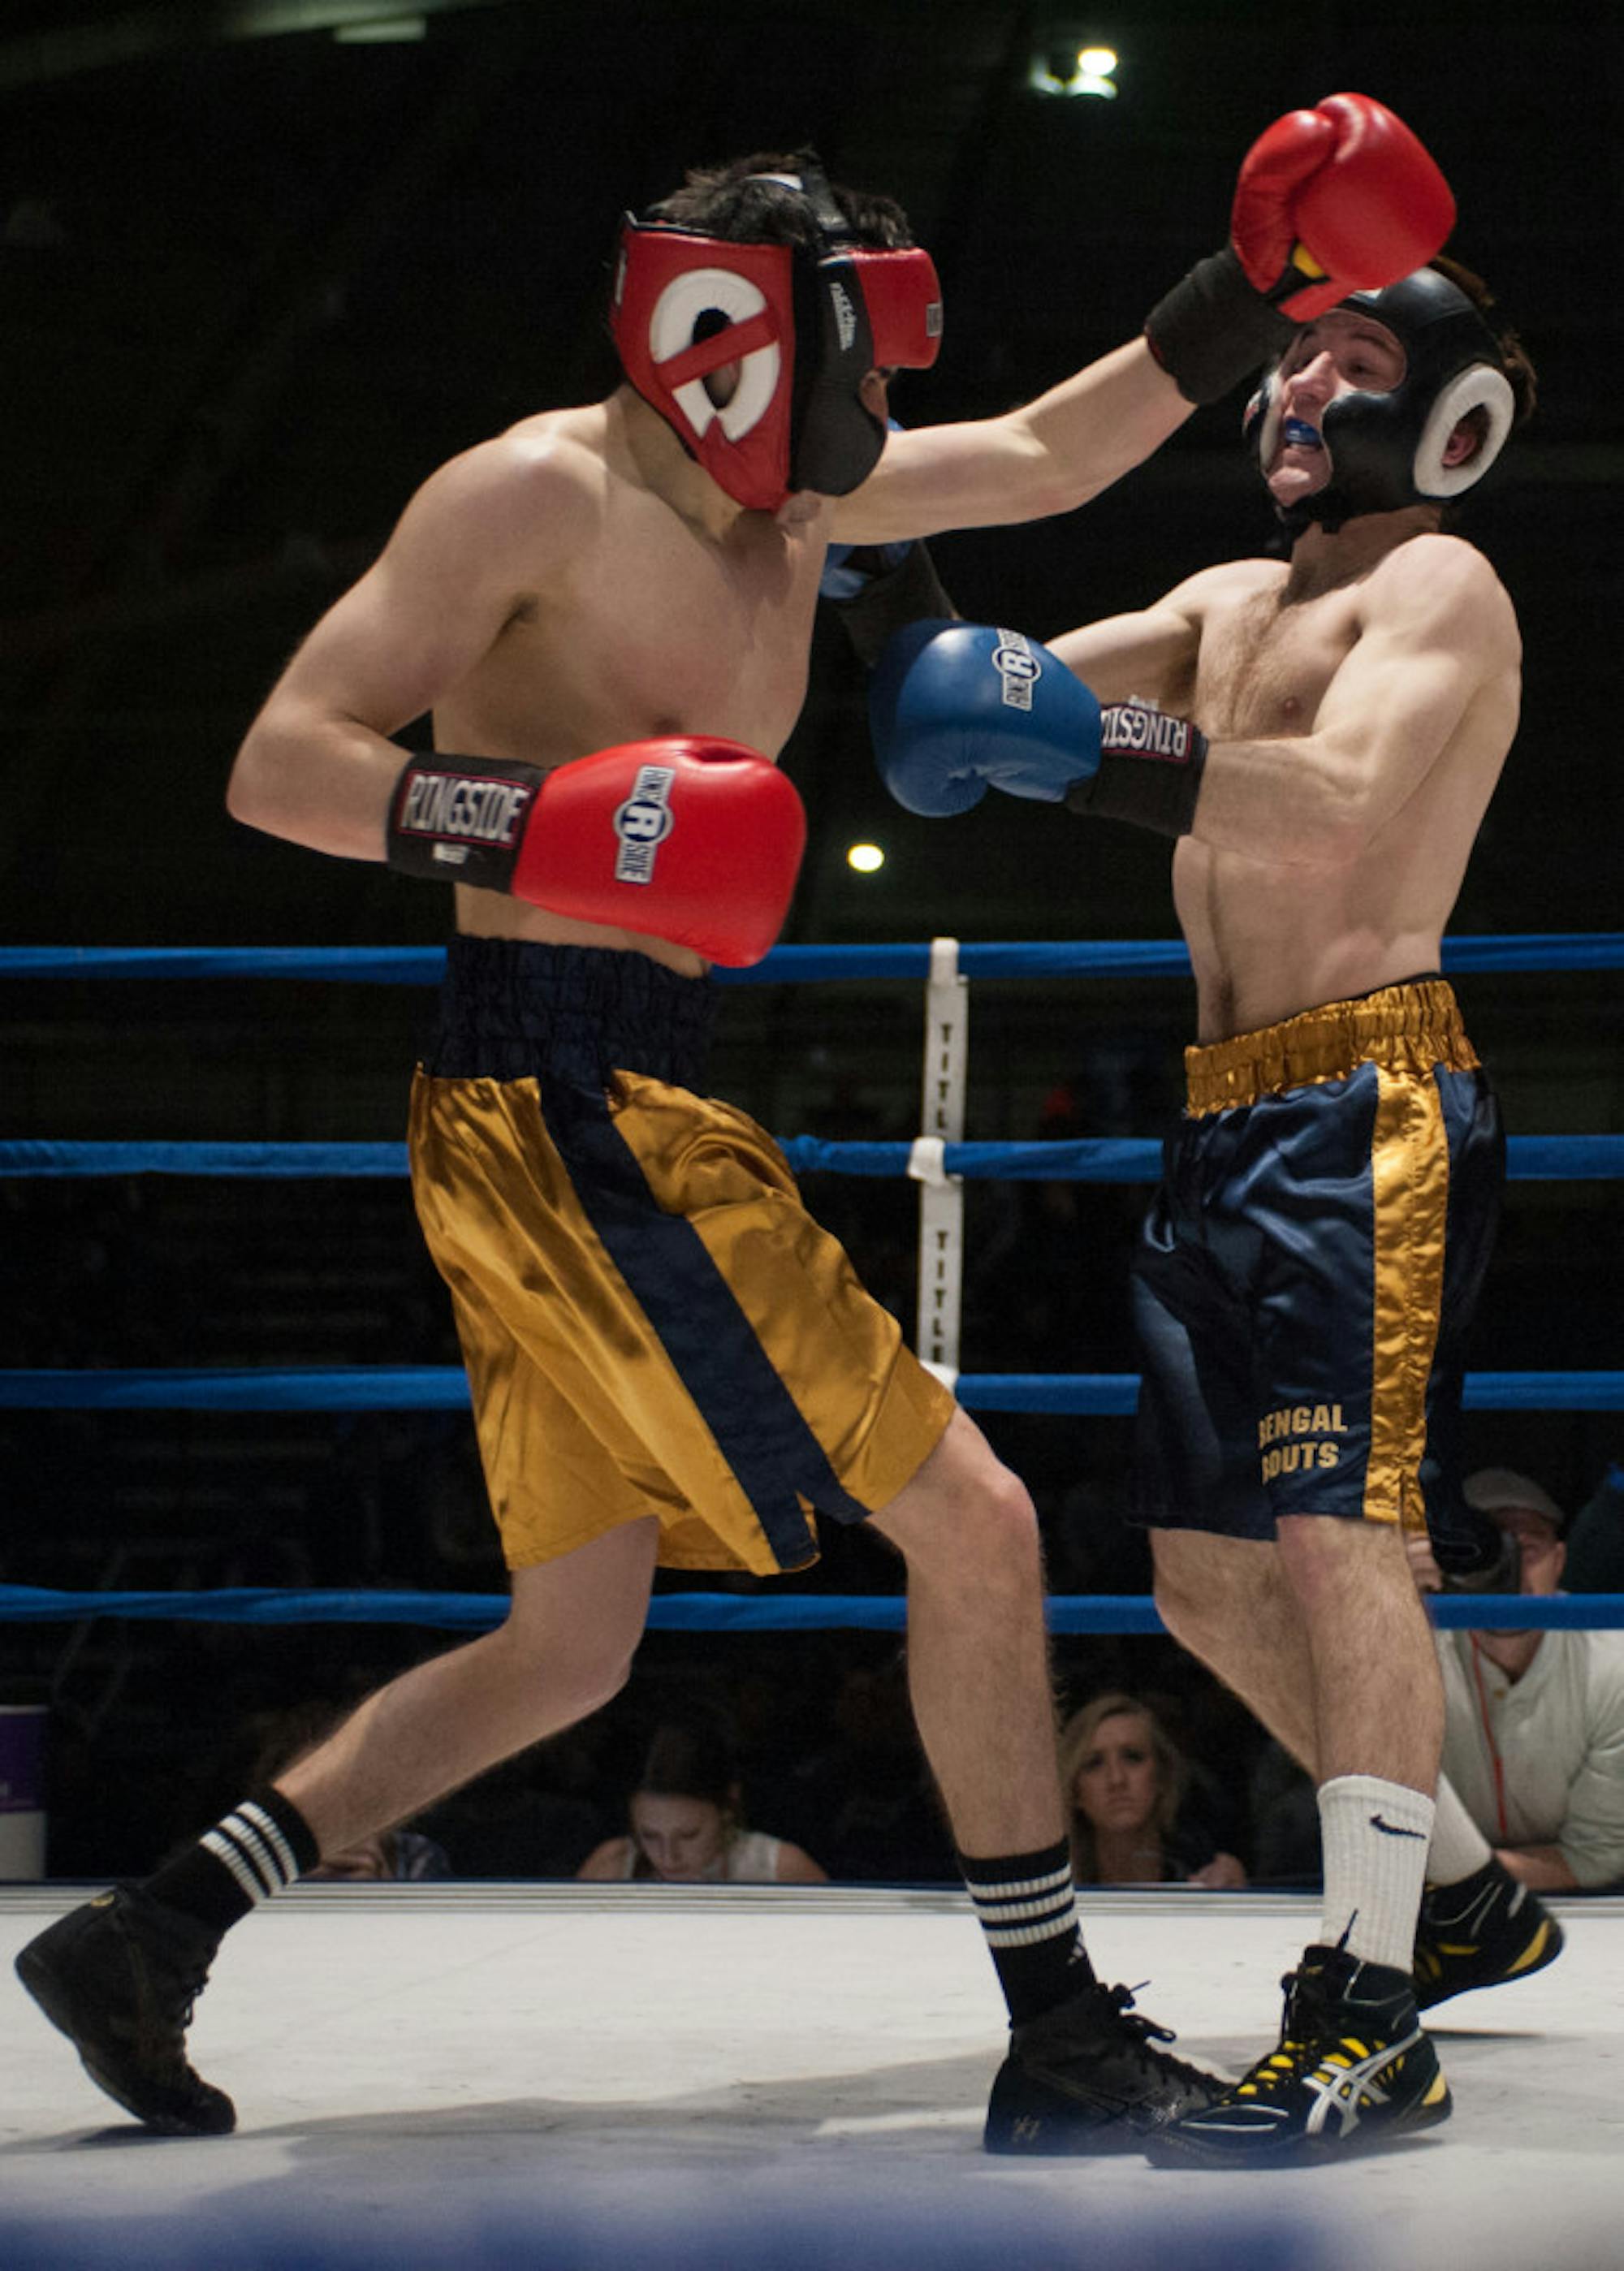 Senior Chris Tricario, right, fights during the 2014 Bengal Bouts at Joyce Fieldhouse. Tricario was unable to participate in this year’s competition due to an injury but remained involved in Bengal Bouts.